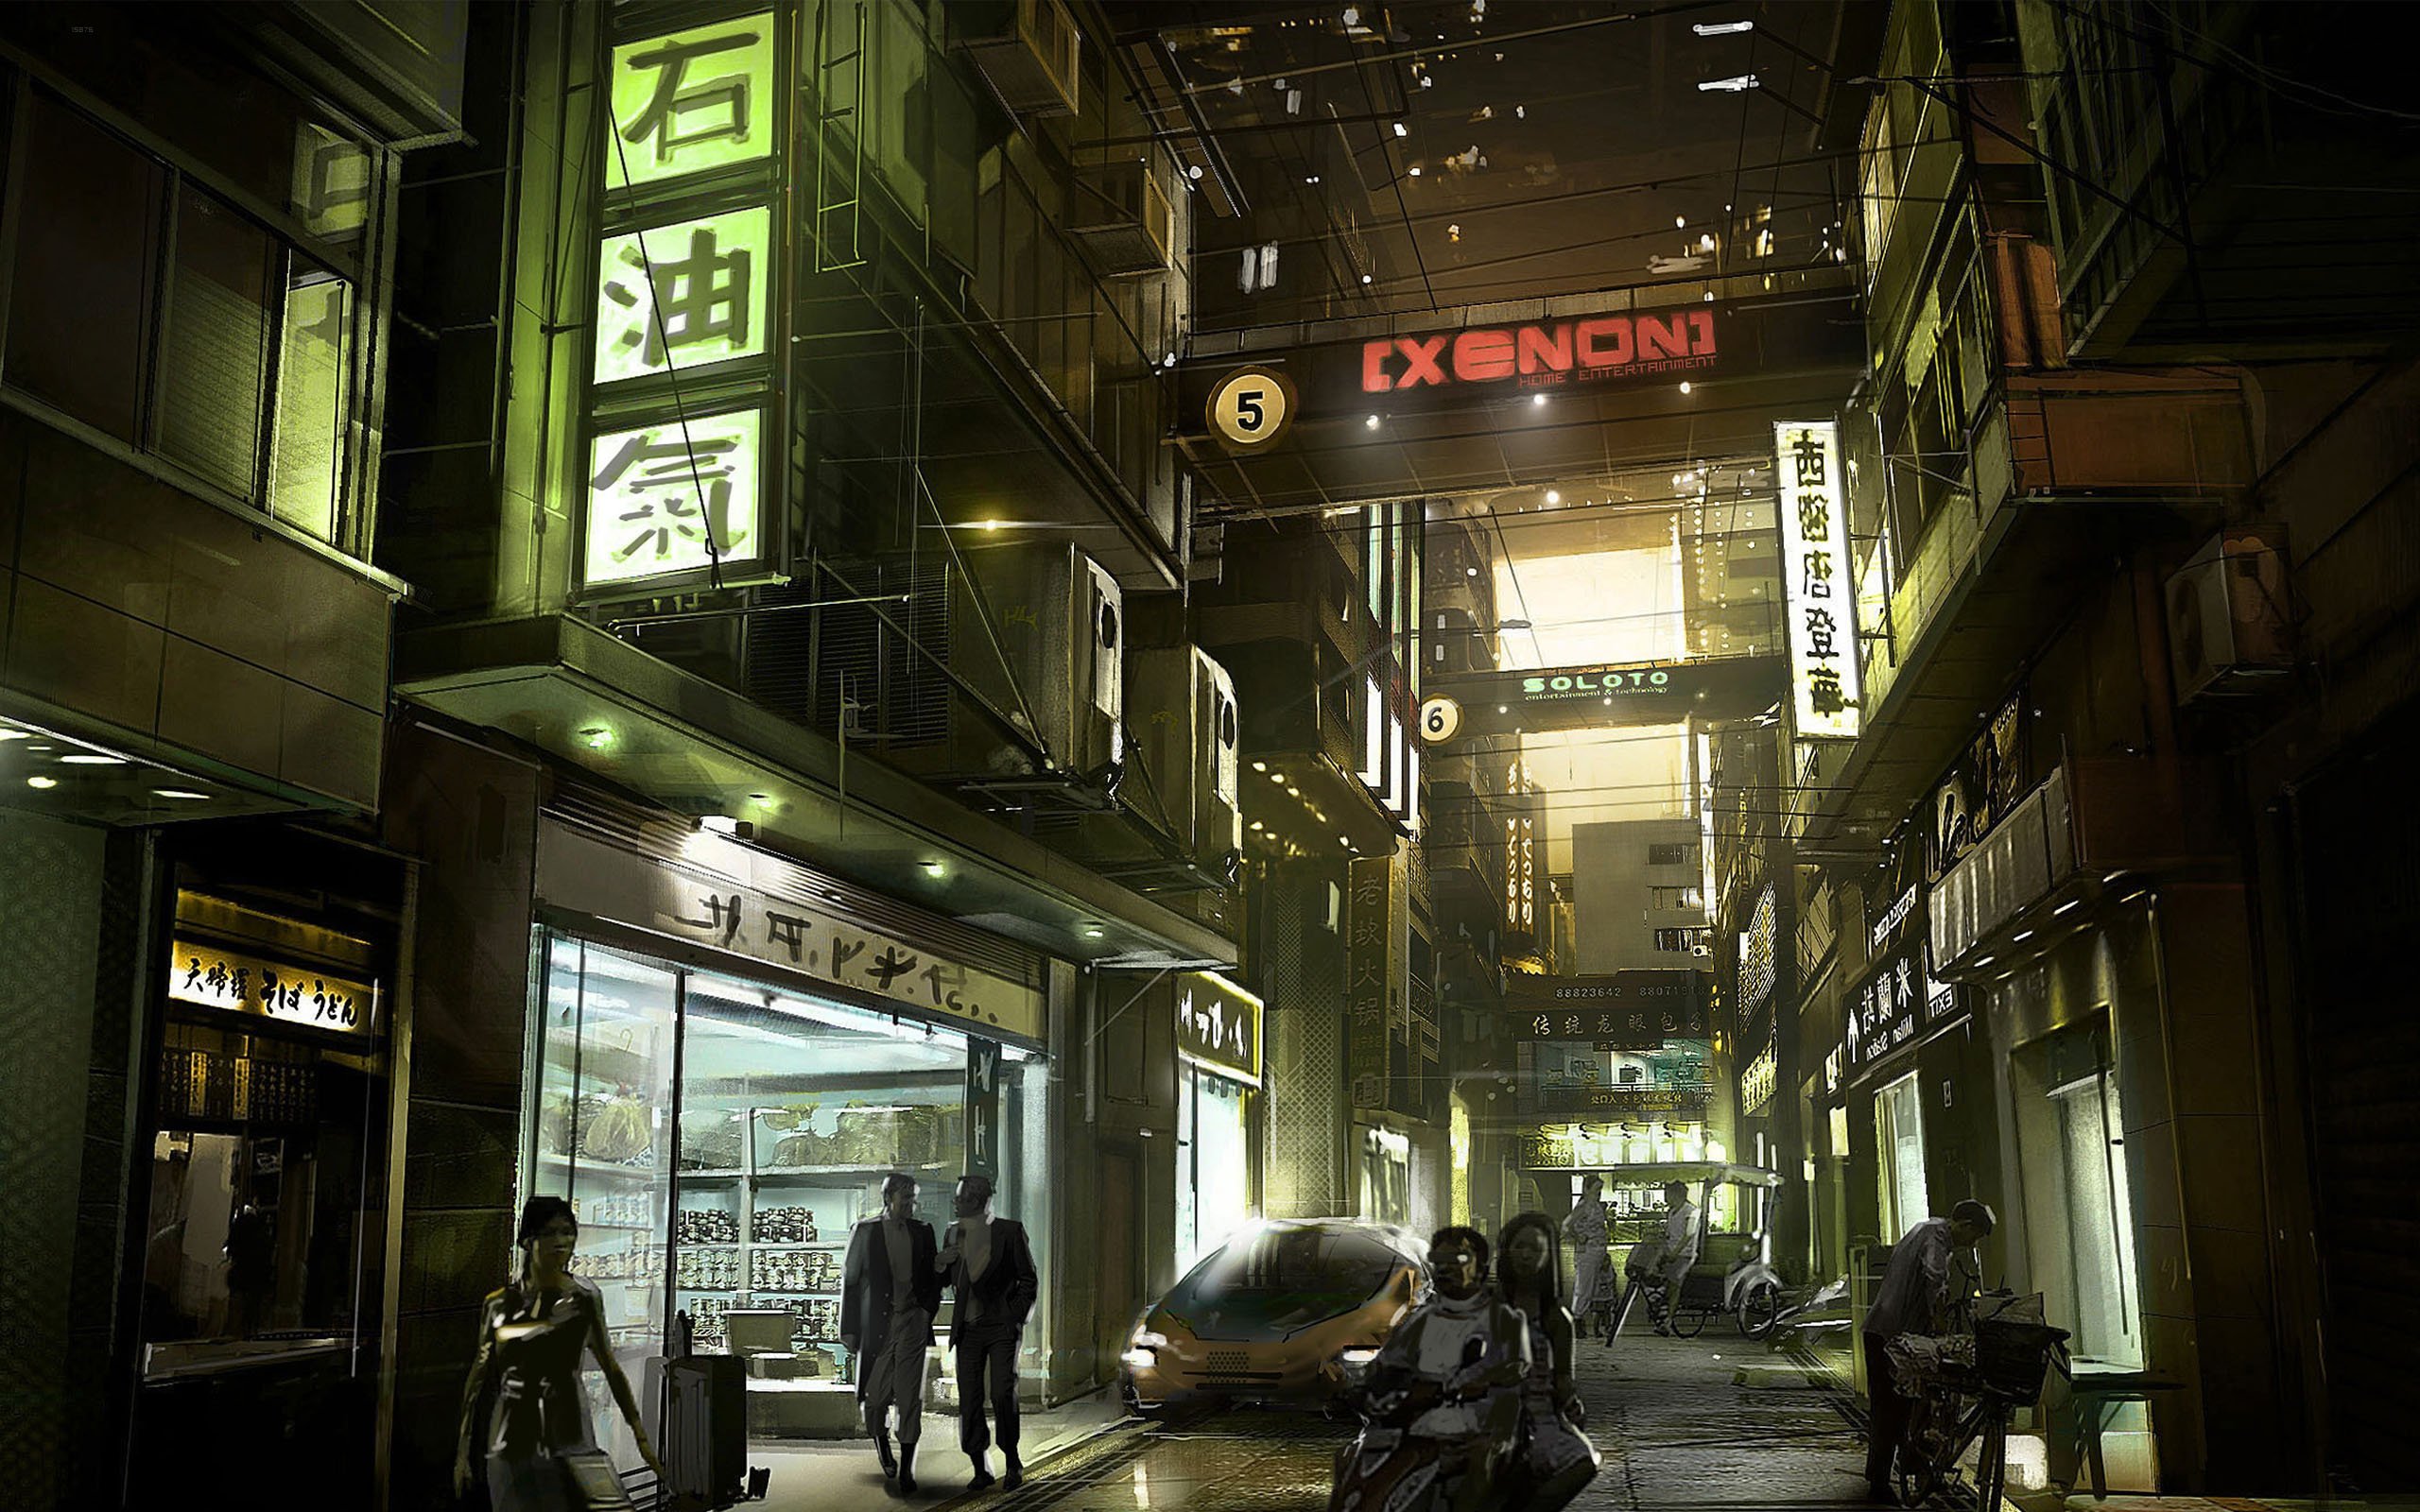 dues, Ex, Cyberpunk, Divided, Fps, Futuristic, Mankind, Rpg, Sci fi, Shooter, Stealth, Tactical, Warrior, Science, Fiction, Fighting, Cyber, Punk, Cyborg, Technics, Mankind, Divided, Human, Revolution, Crime, F Wallpaper